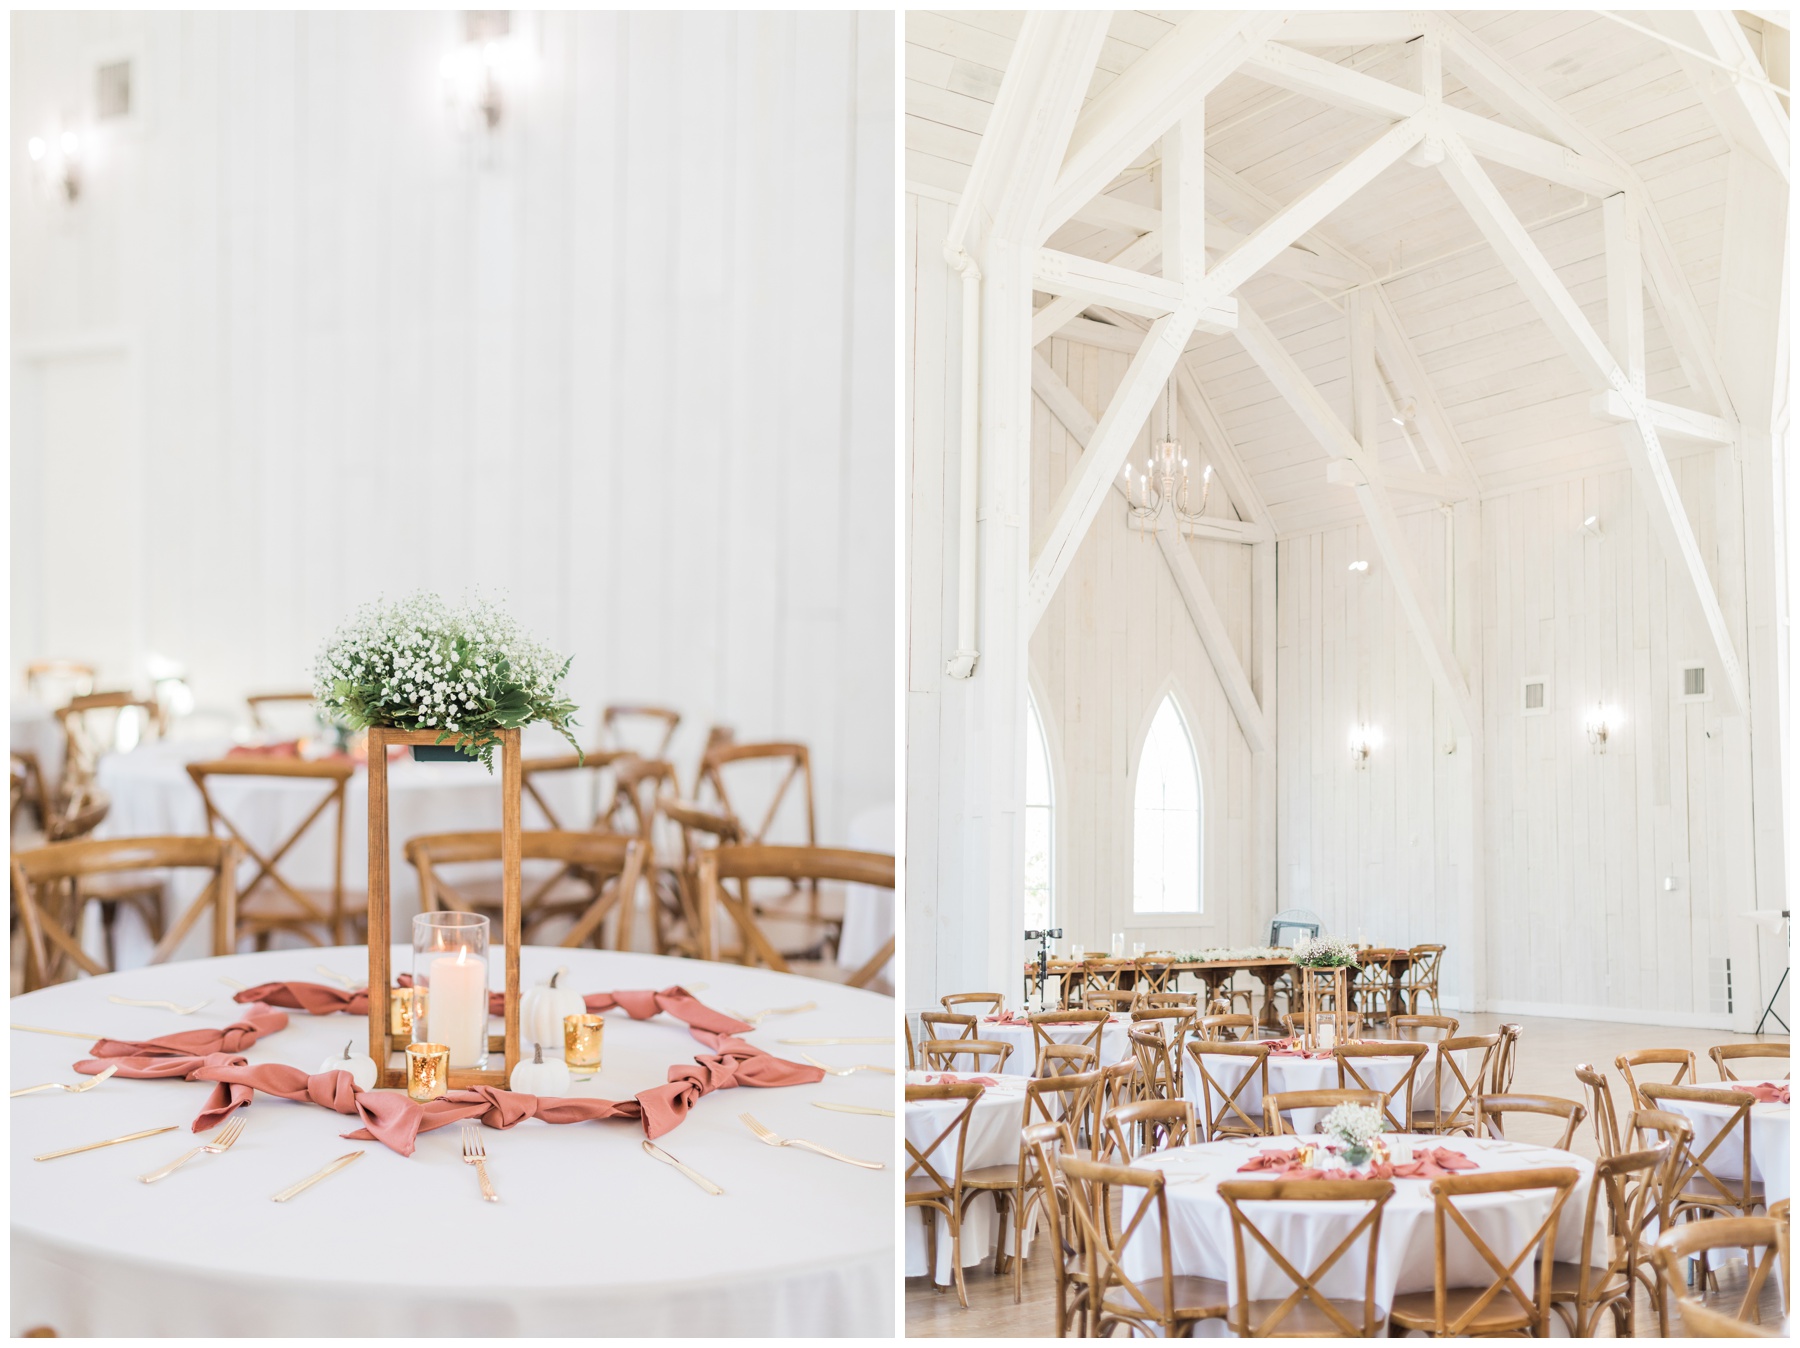 White and terracotta linens, gold cutlery, and baby's breath for a boho-inspired wedding reception